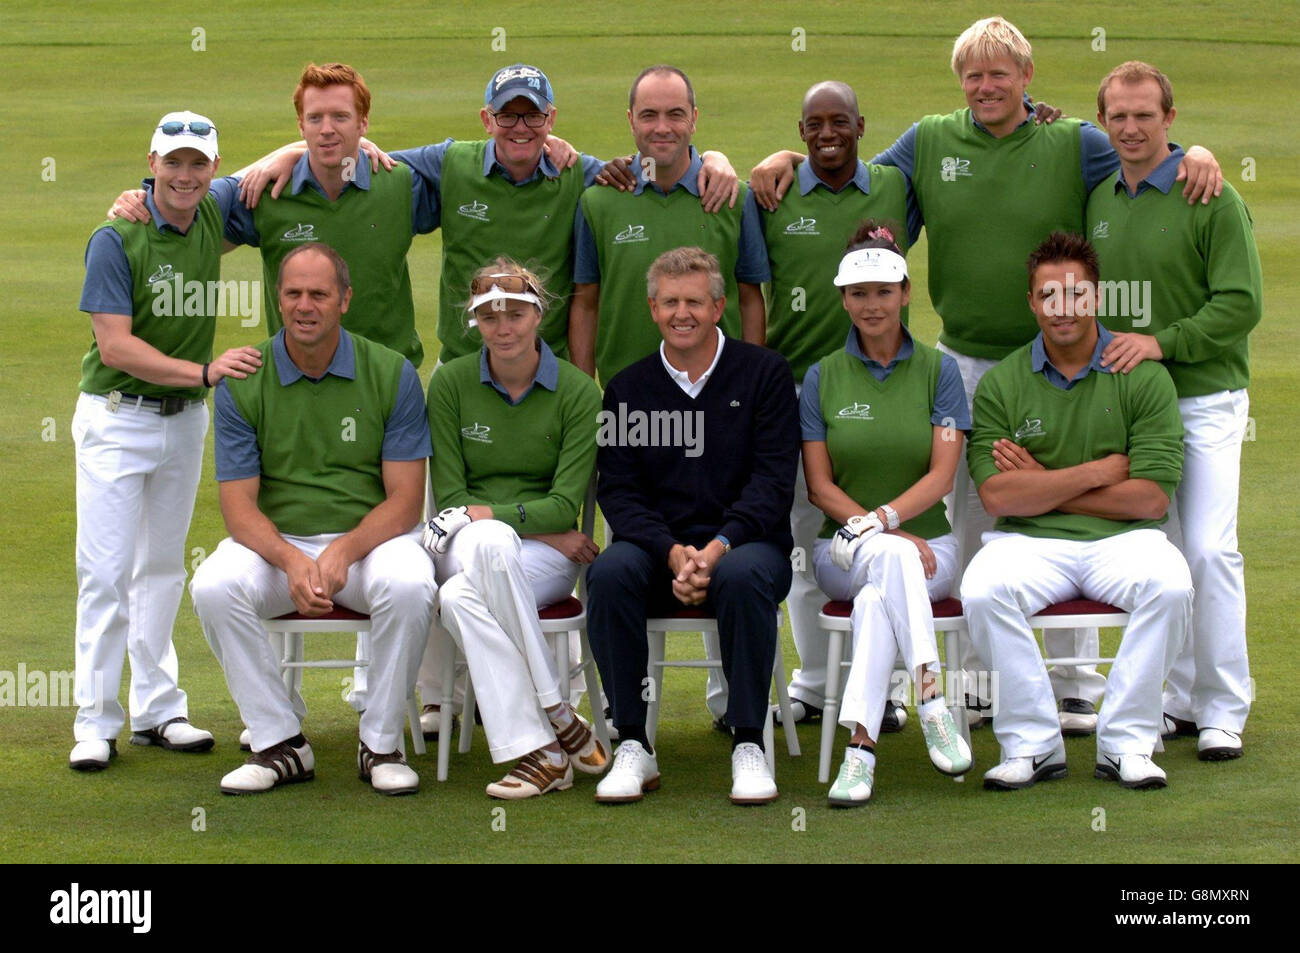 The European Team All Star Cup celebrity golf (Back row from left) Ronan Keating, Damian Lewis, Chris Evans, James Nesbitt, Ian Wright, Peter Schmeichel, Matt Dawson MBE, (front row) Sir Steve Redgrave, Jodie Kidd, captain Colin Montgomerie, Catherine Zeta-Jones and Gavin Henson prepare for the start of the All Star Cup celebrity golf tournament on Saturday 27 August 2005, which is being held at the Celtic Manor Resort near Newport, Wales. See PA story SHOWBIZ Golf. PRESS ASSOCIATION Photo. Photo credit should read: Steve Parsons/PA Stock Photo